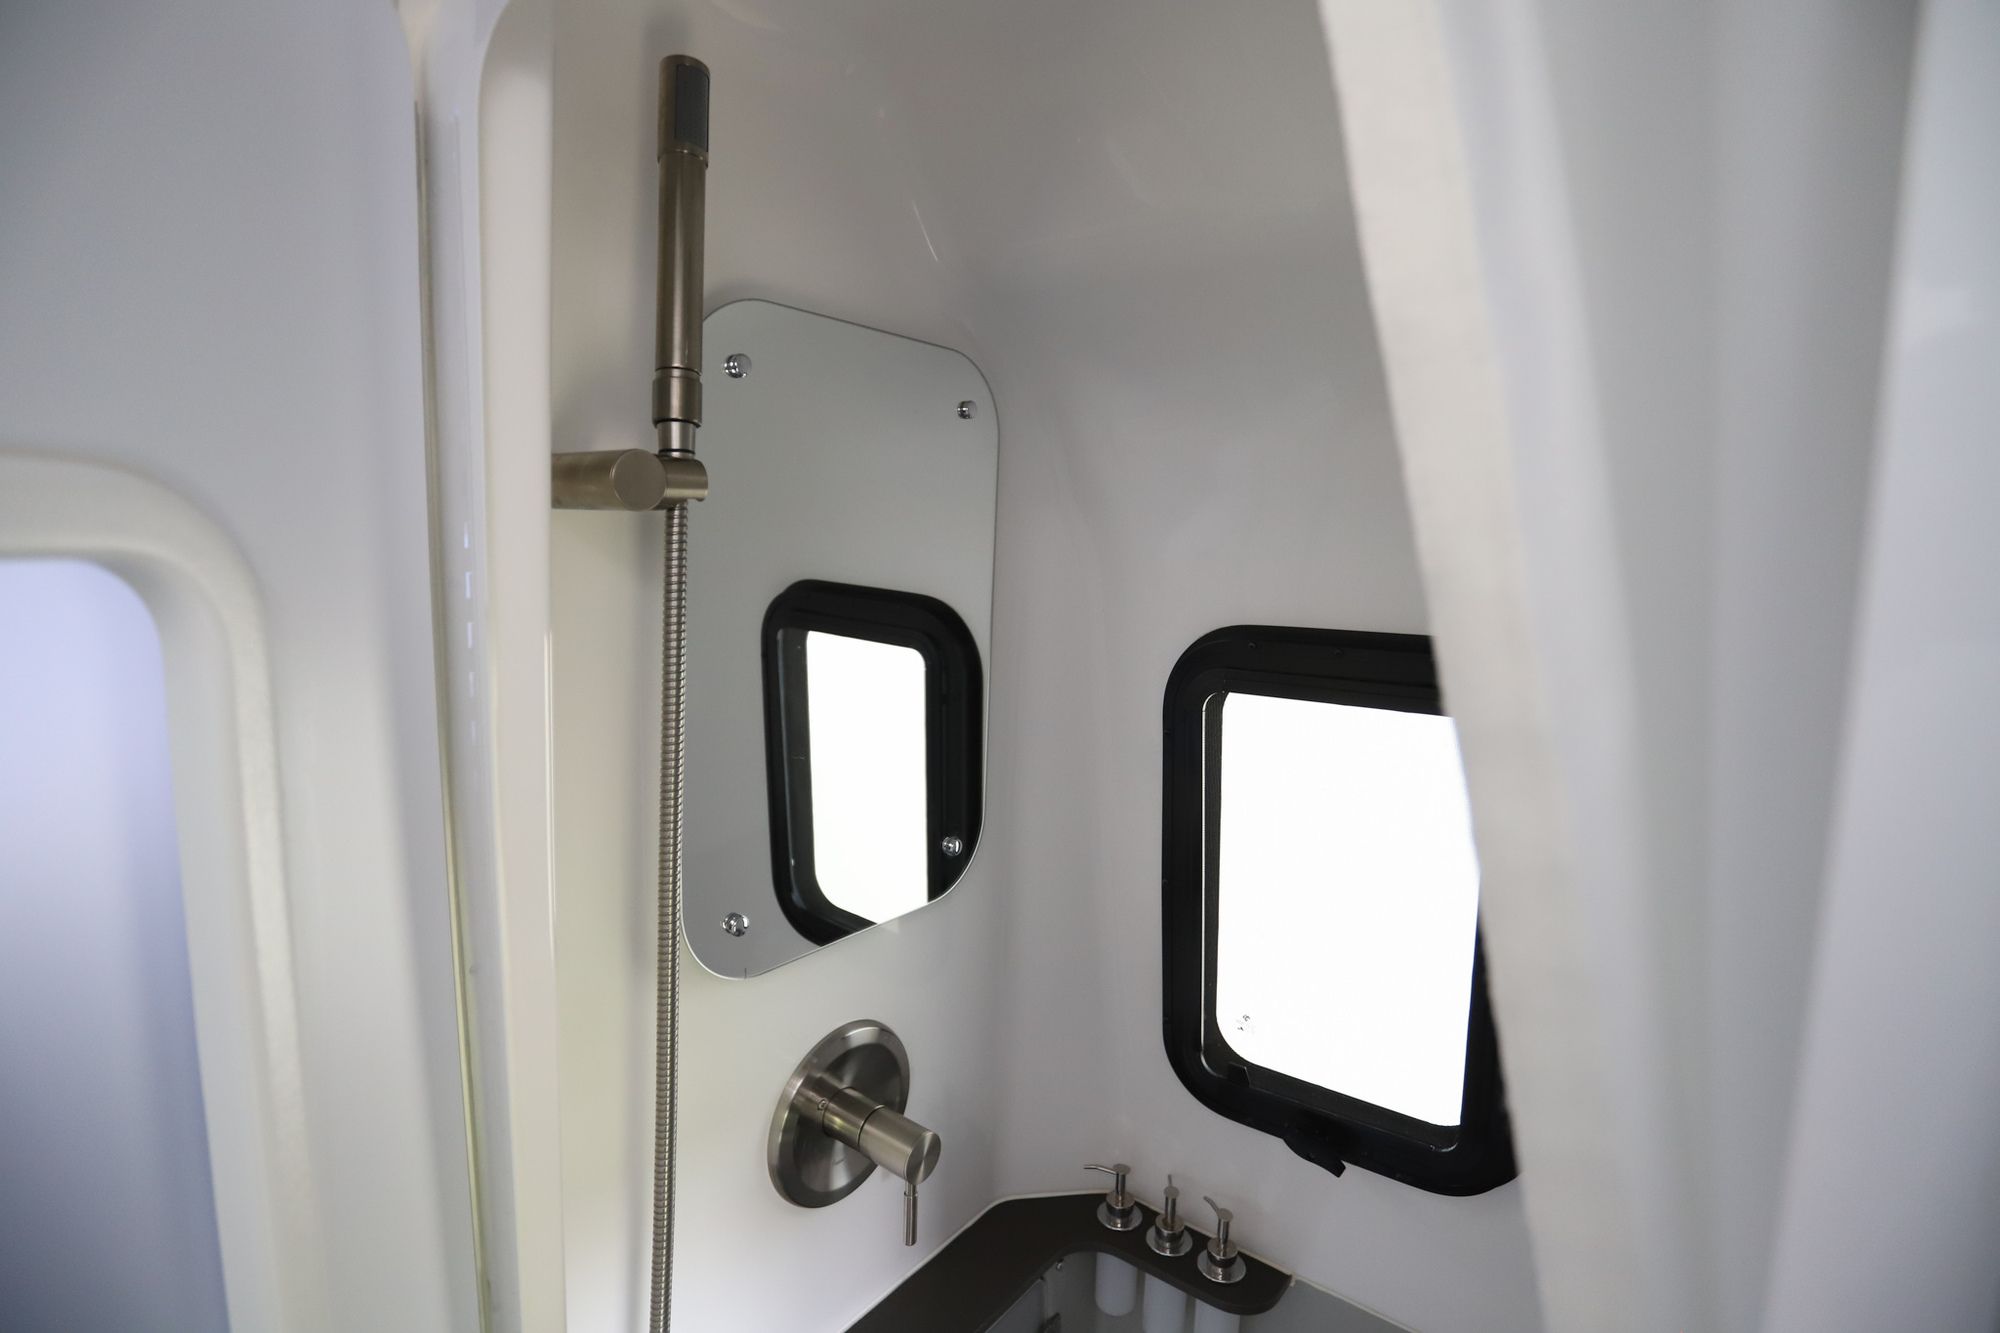 Used 2020 Airstream Nest 16U Travel Trailer  For Sale